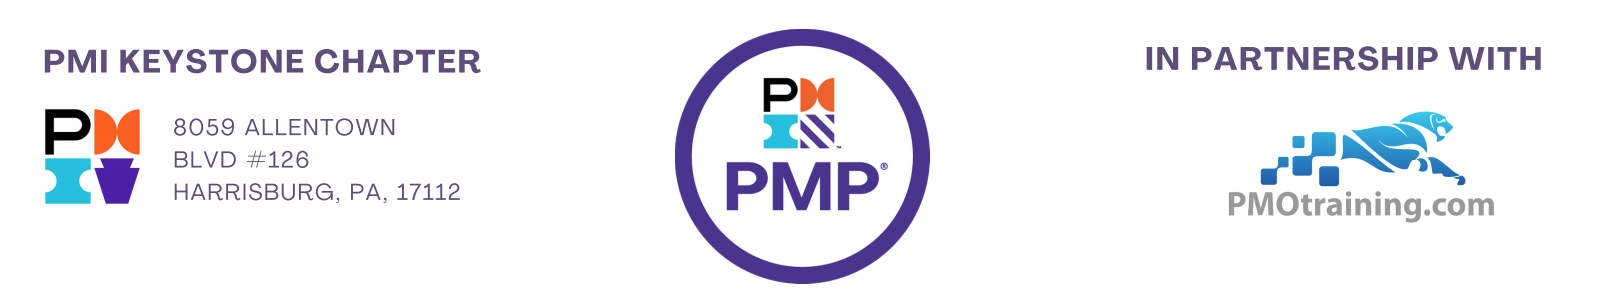 Footer_PMP_PMOT.png